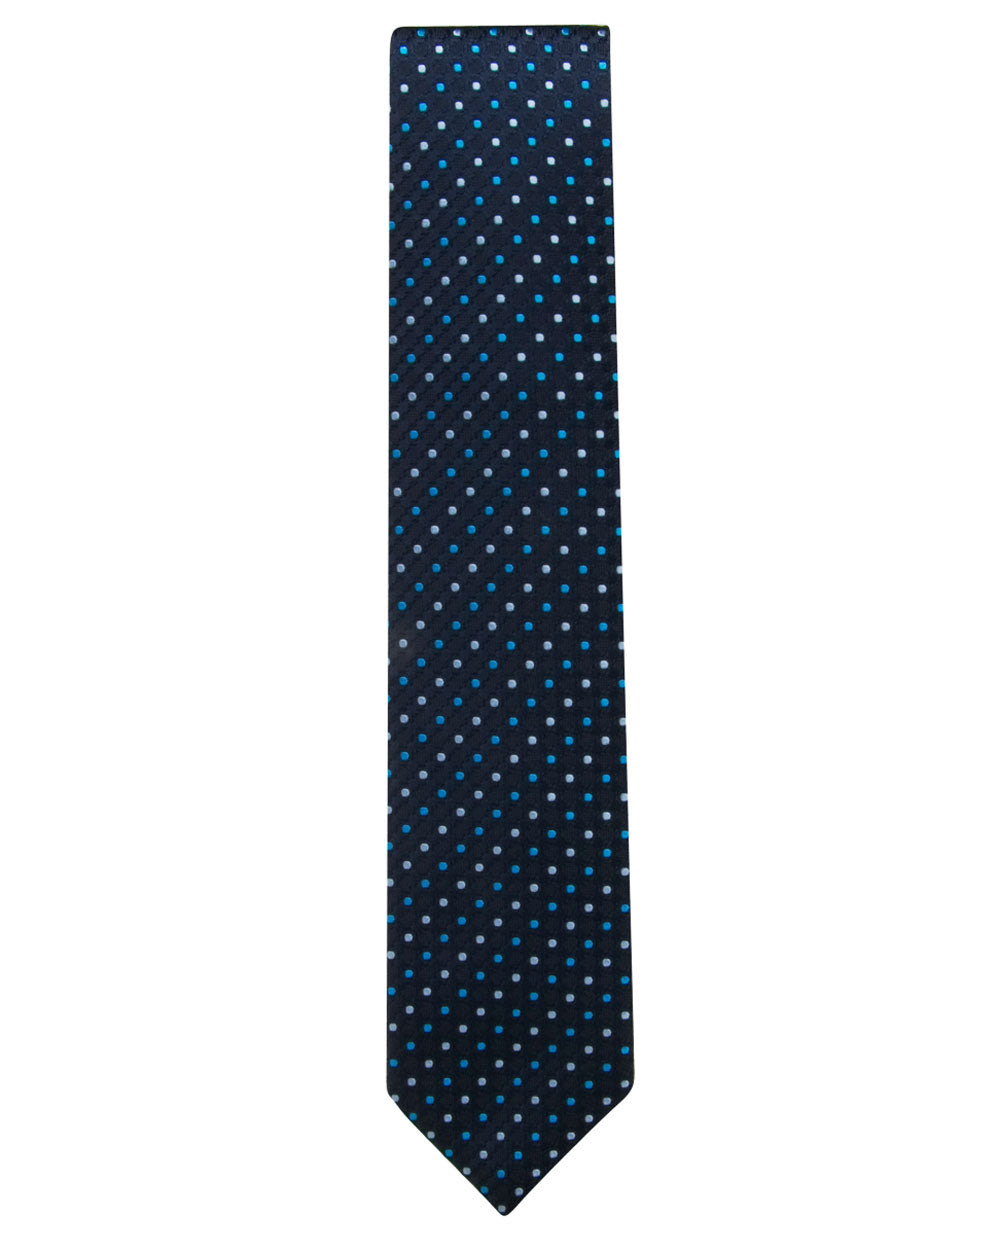 Navy and Bright Blue Dotted Tie